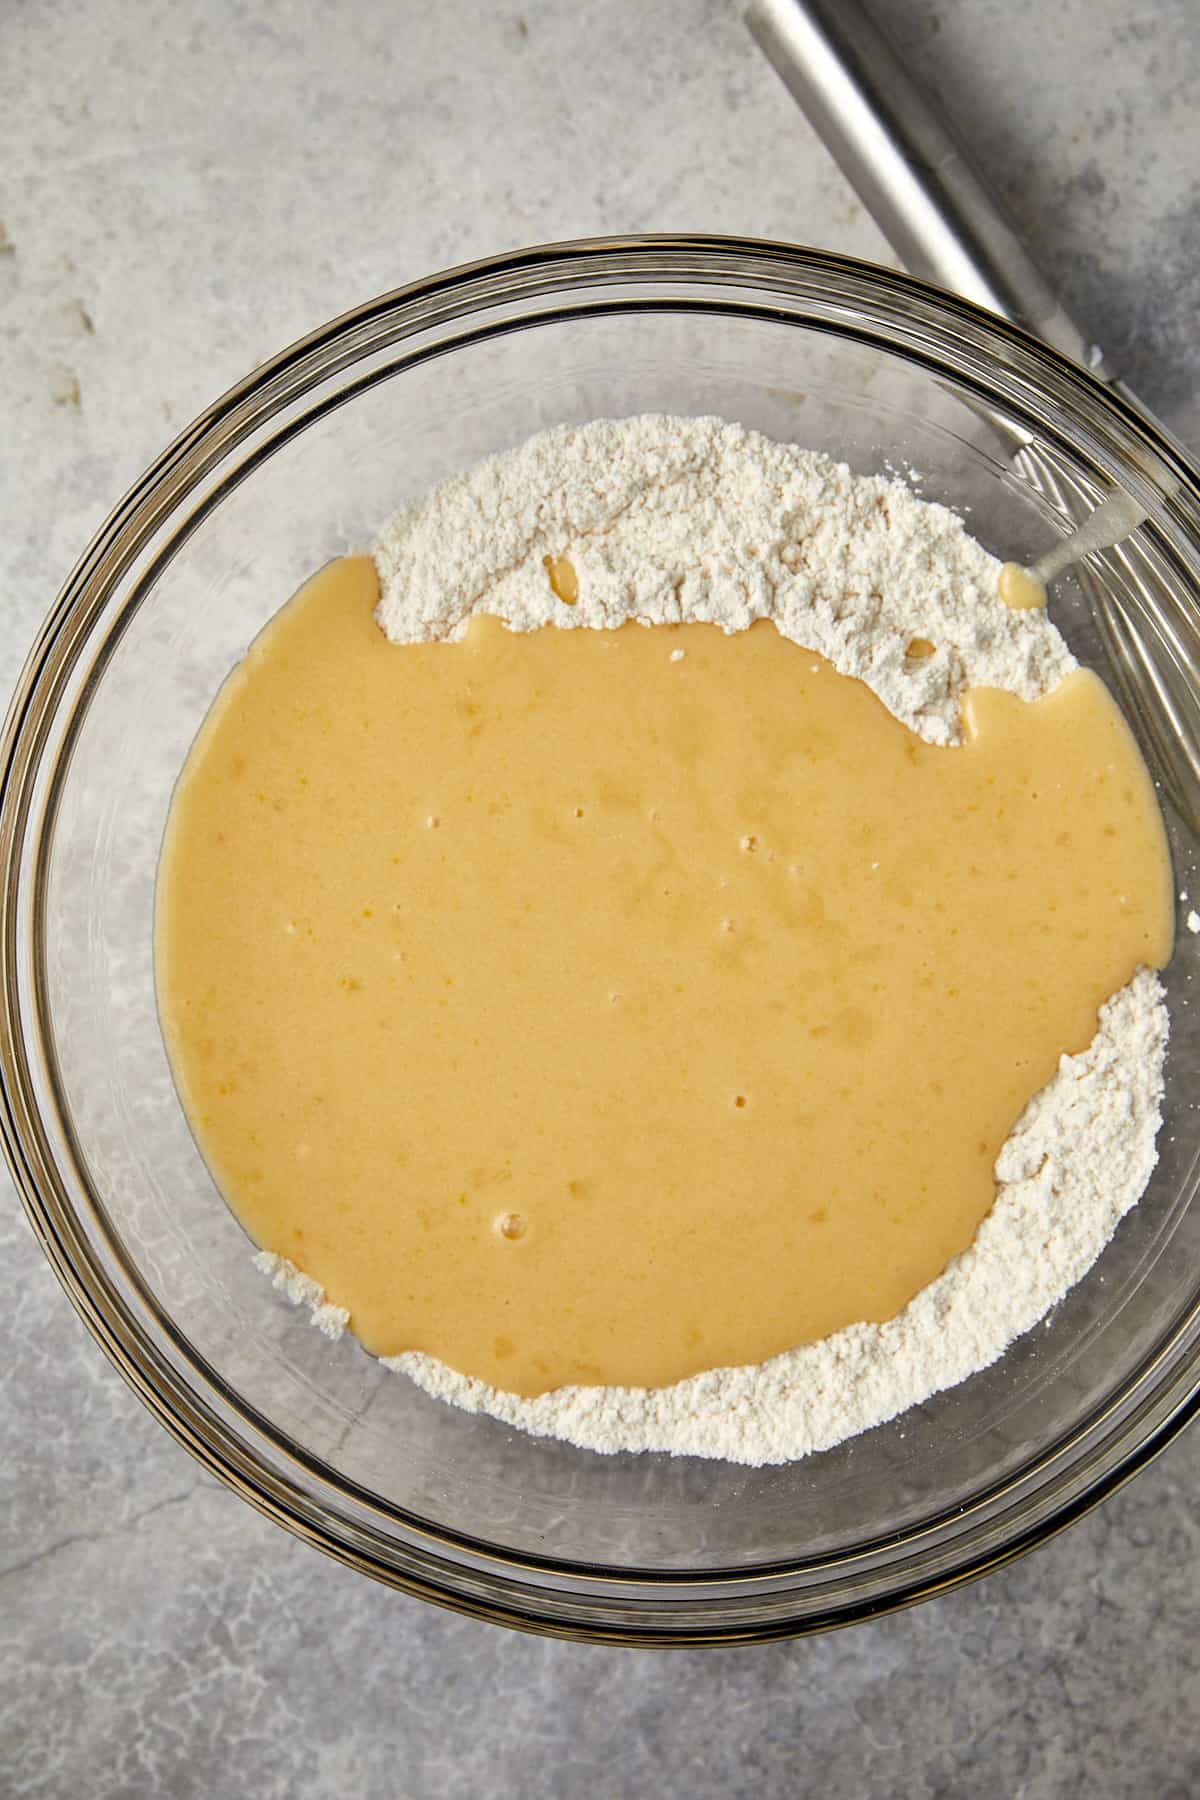 The image shows a glass mixing bowl with a mixture of wet and dry ingredients on a gray surface. One side of the bowl contains a creamy, tan-colored liquid mixture, while the other holds a white flour pile. The ingredients are on the verge of being mixed, indicating a step in a baking recipe where the wet and dry components are combined to form a batter.